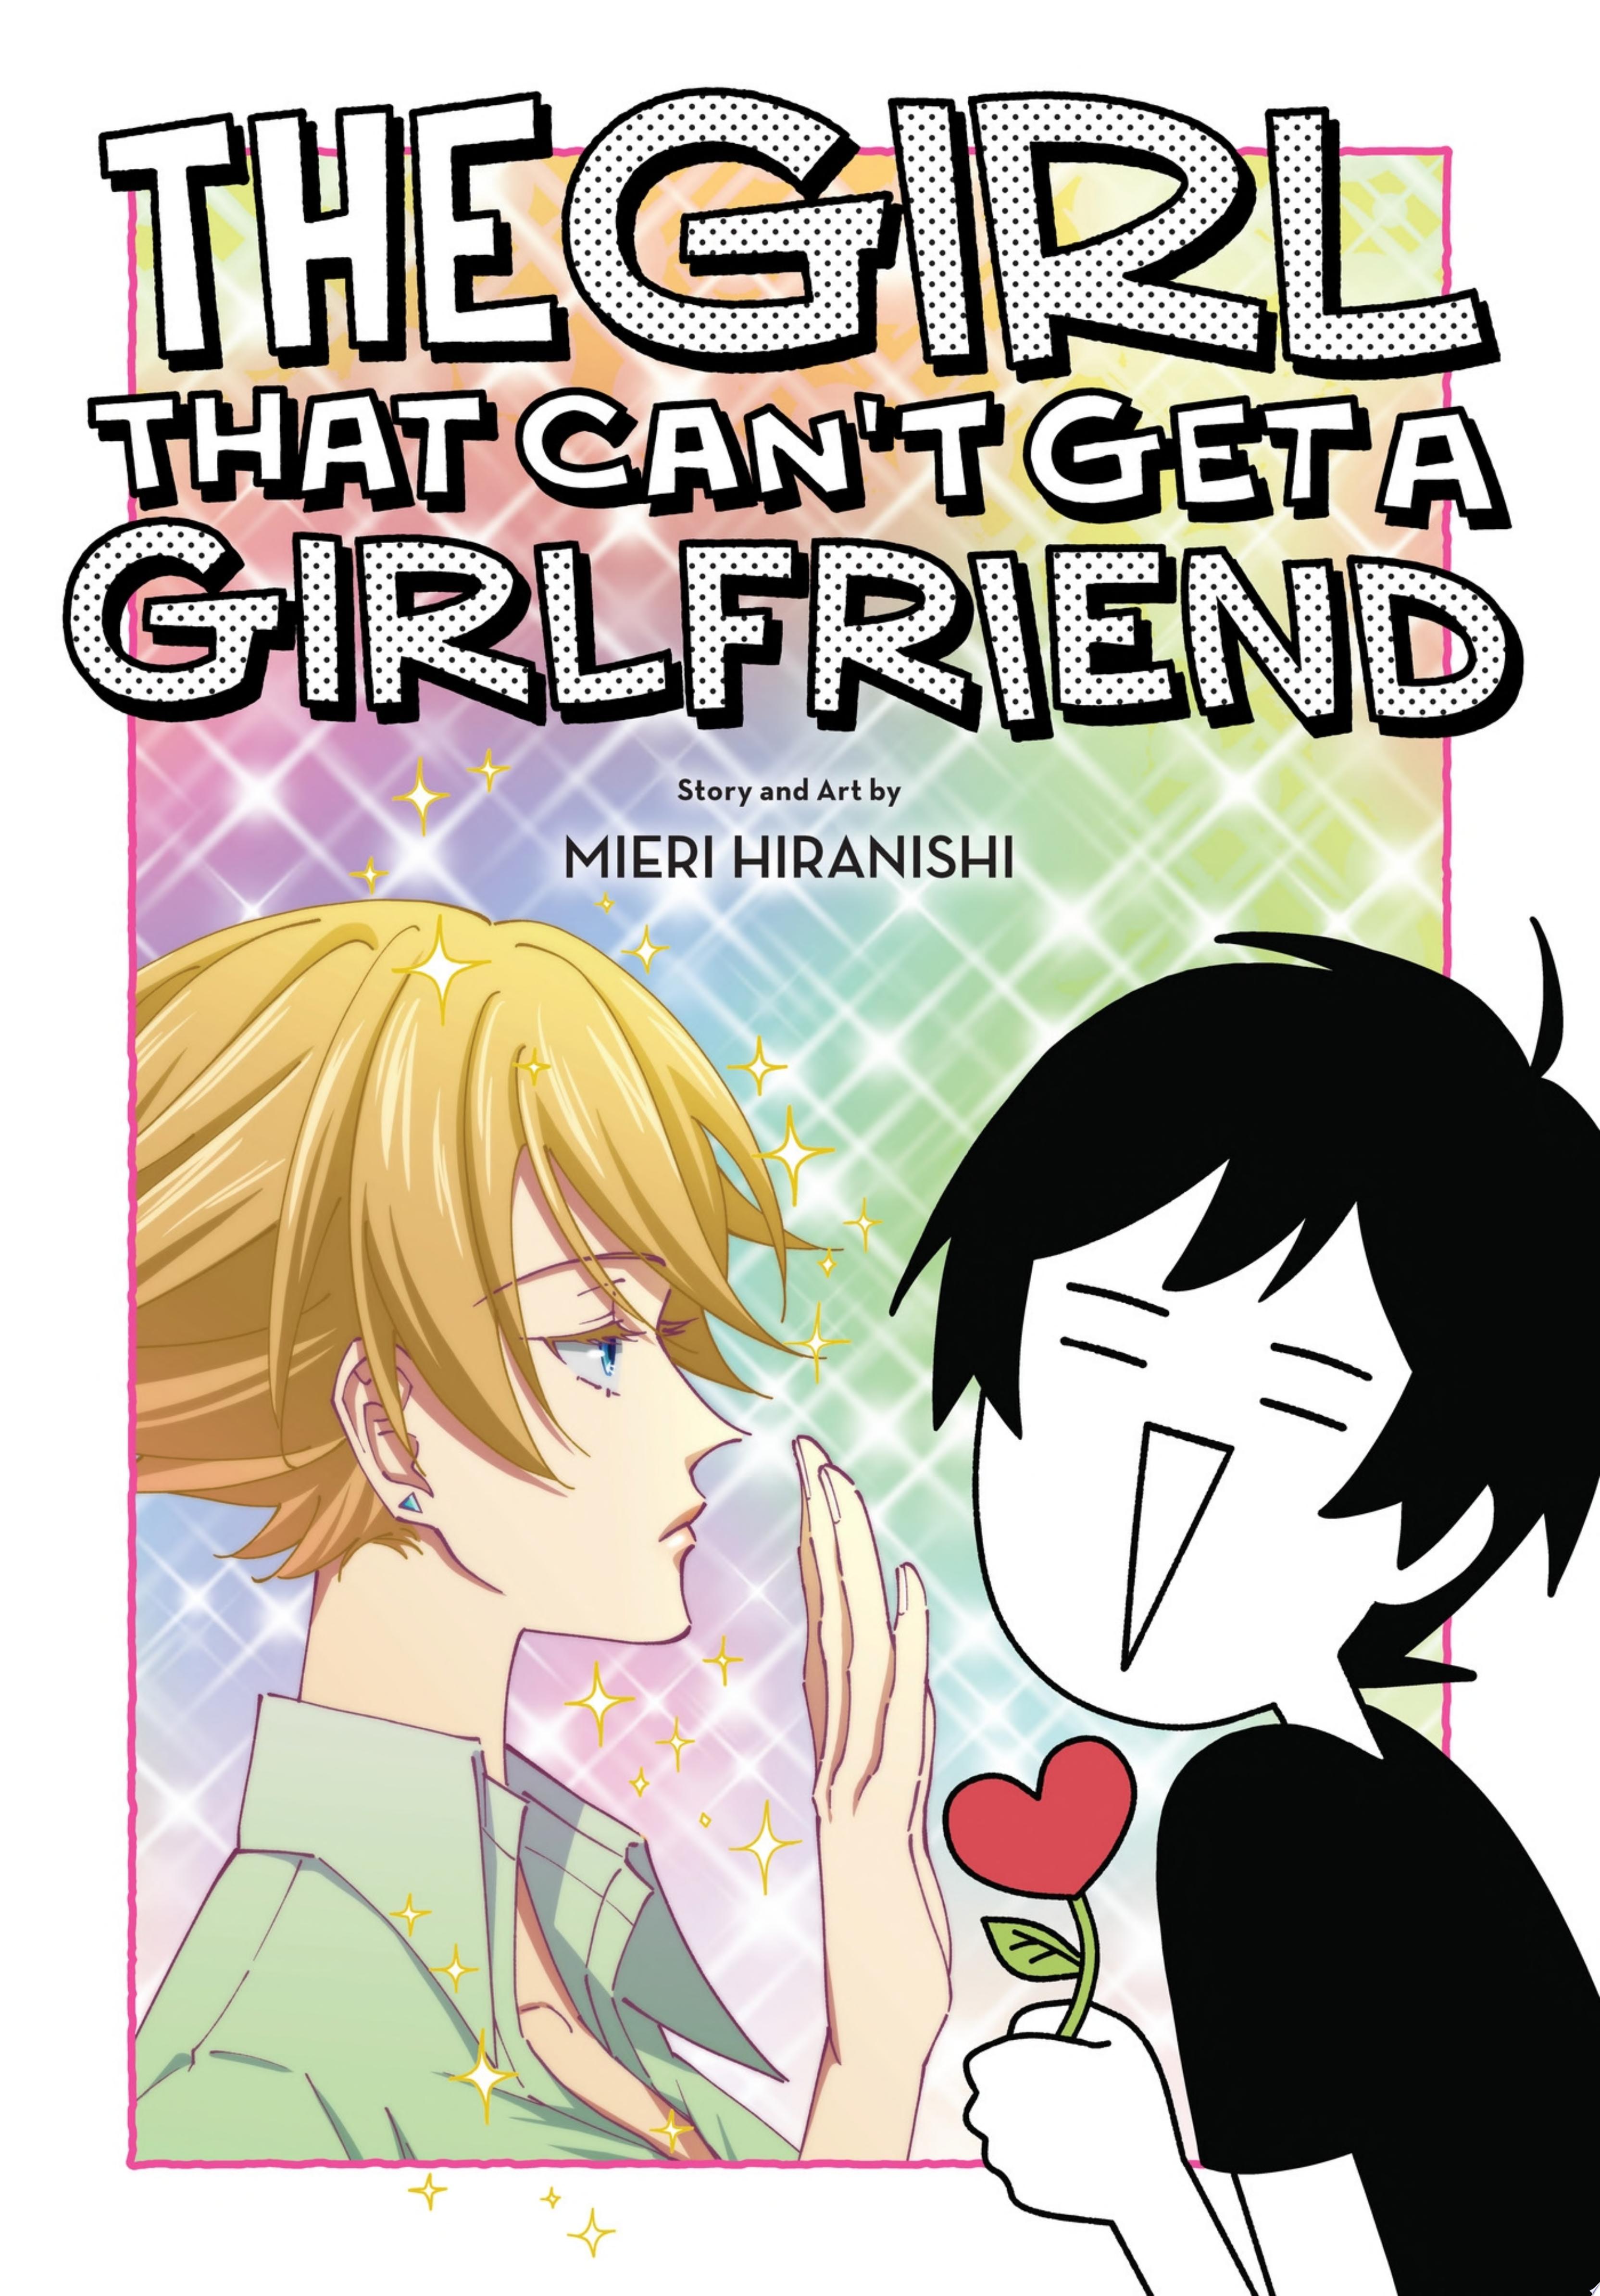 Image for "The Girl That Can’t Get a Girlfriend"